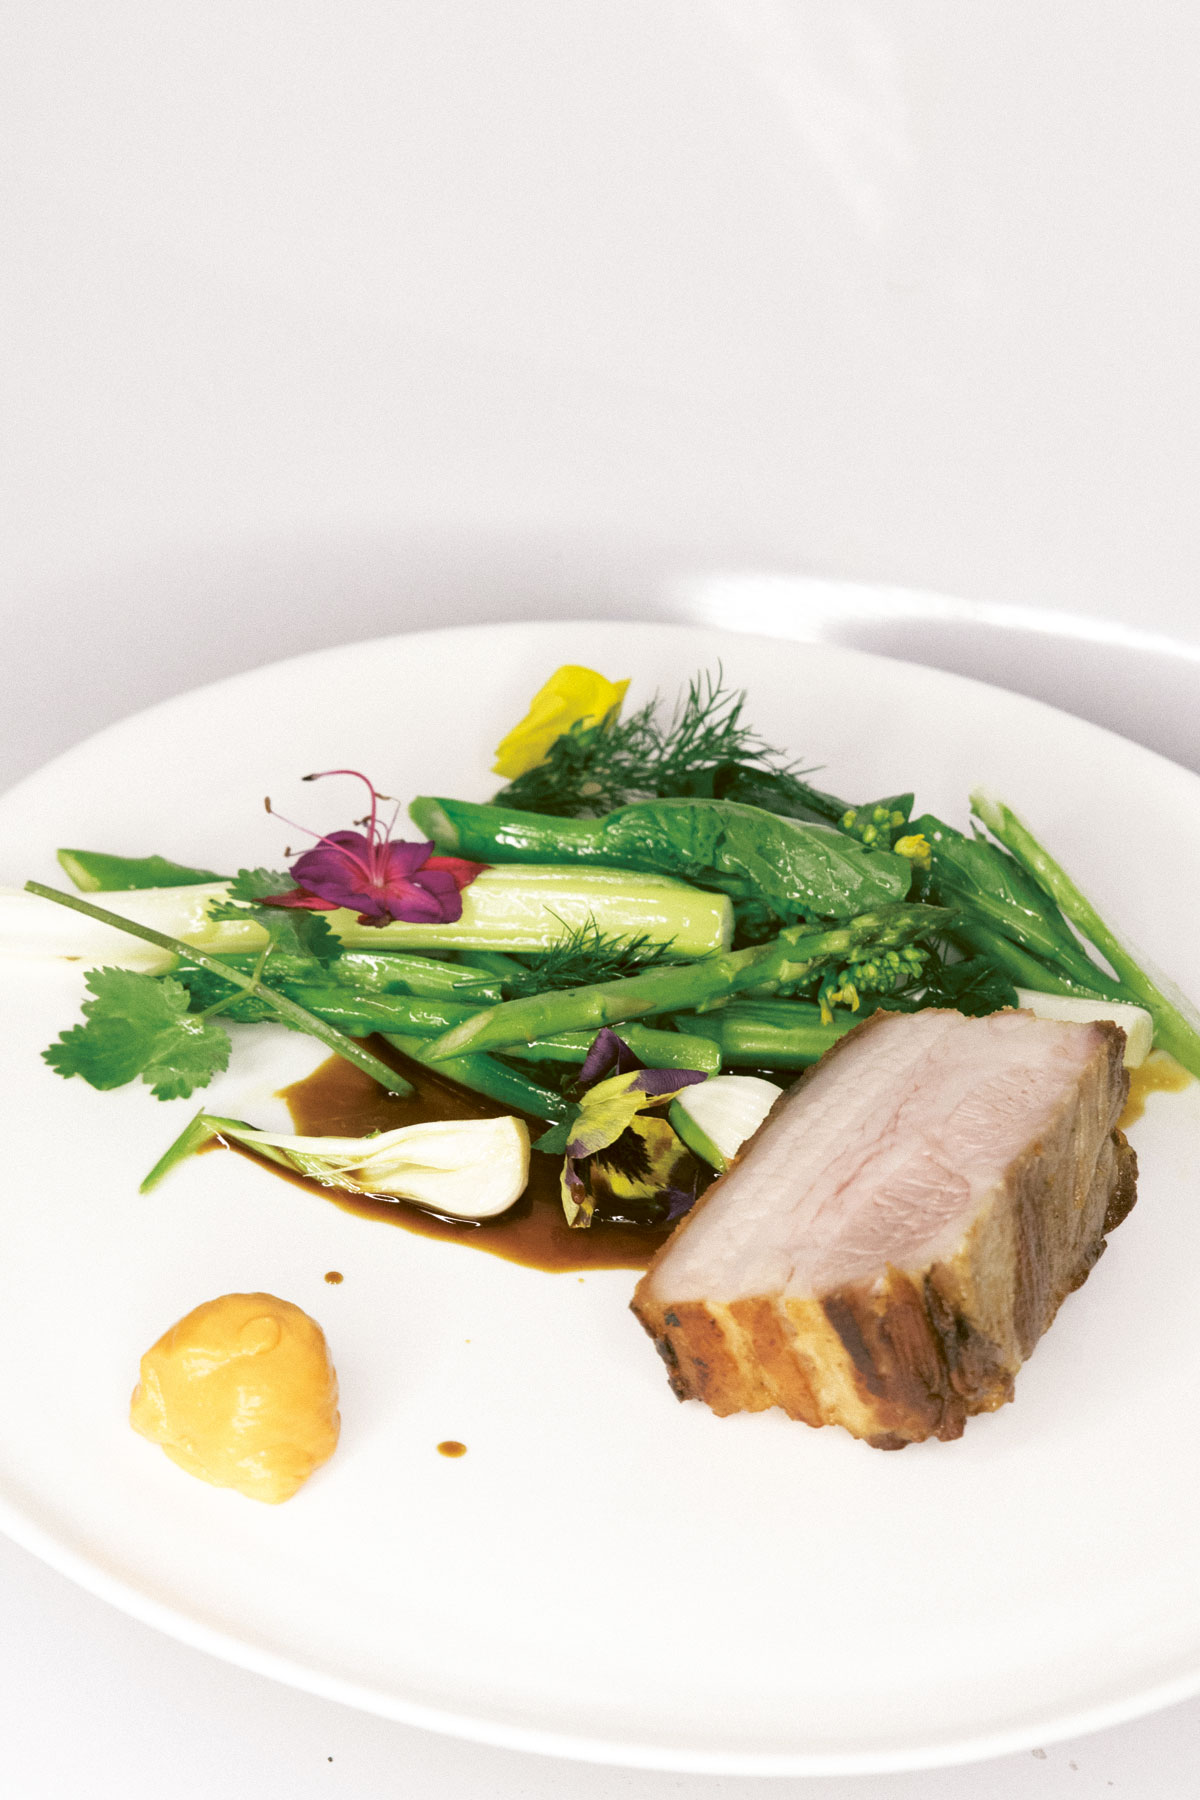 Pork and vegetable dish by Tony Yoo